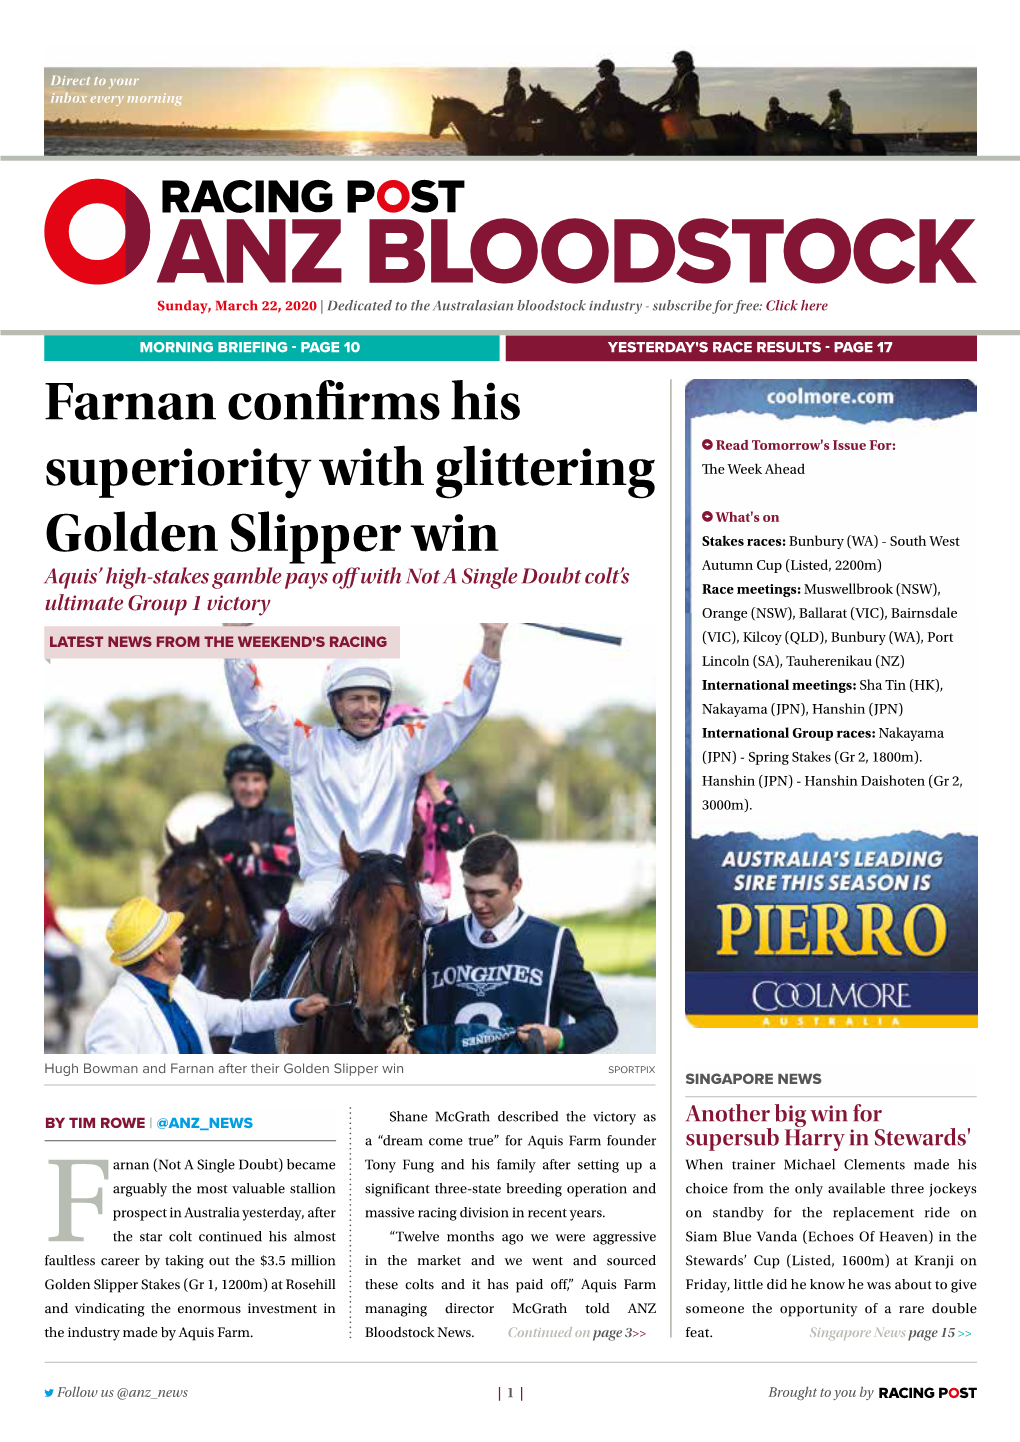 Farnan Confirms His Superiority with Glittering Golden Slipper